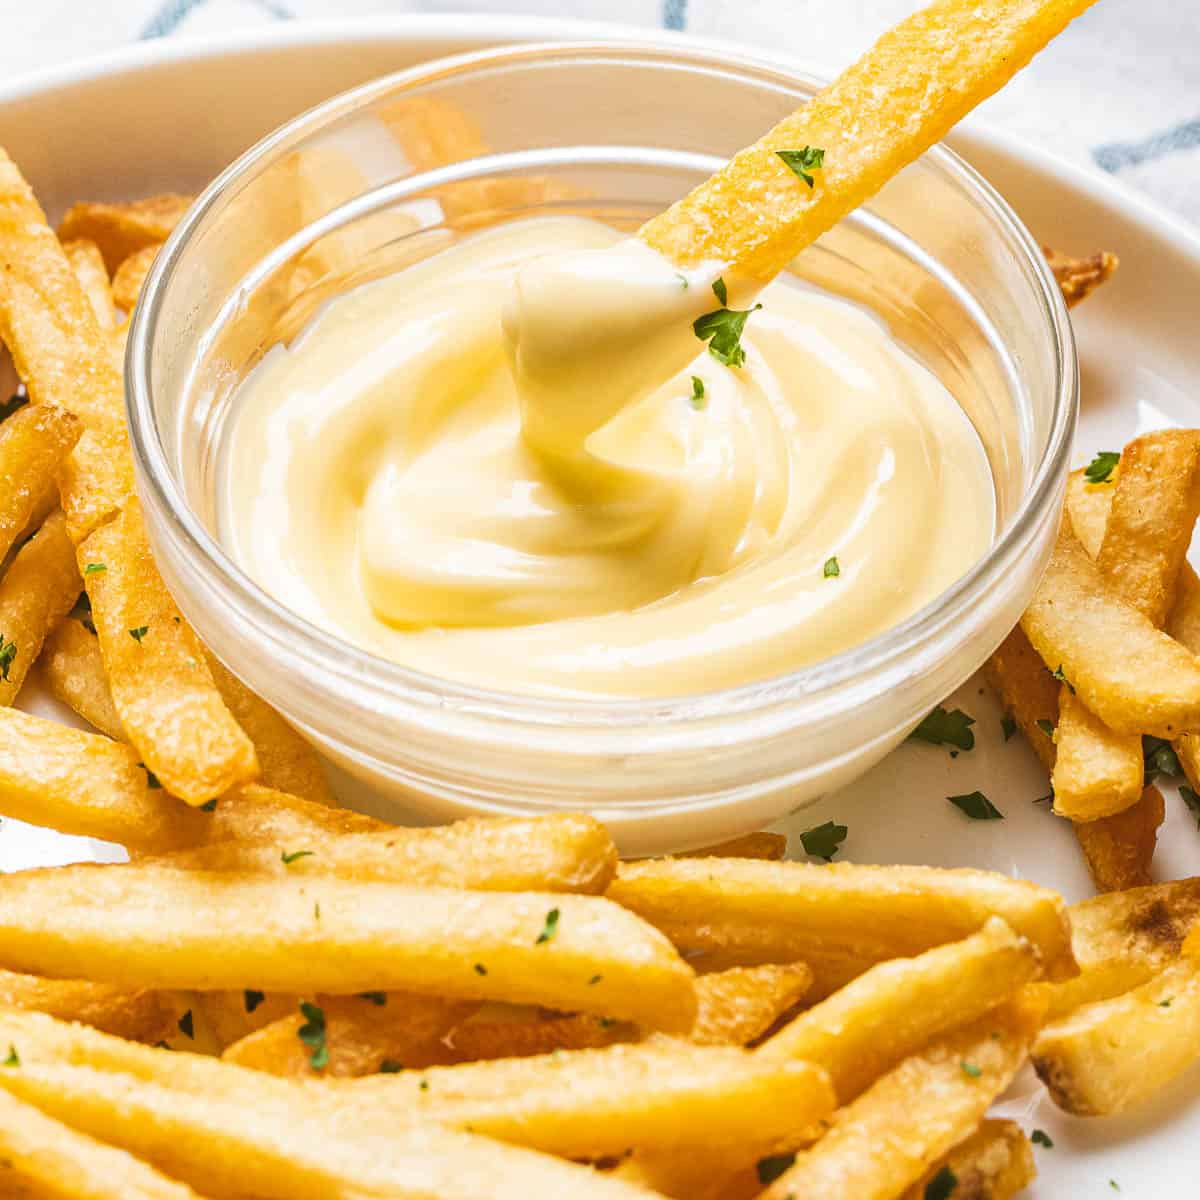 Preparation of Garlic Aioli serve with french fries